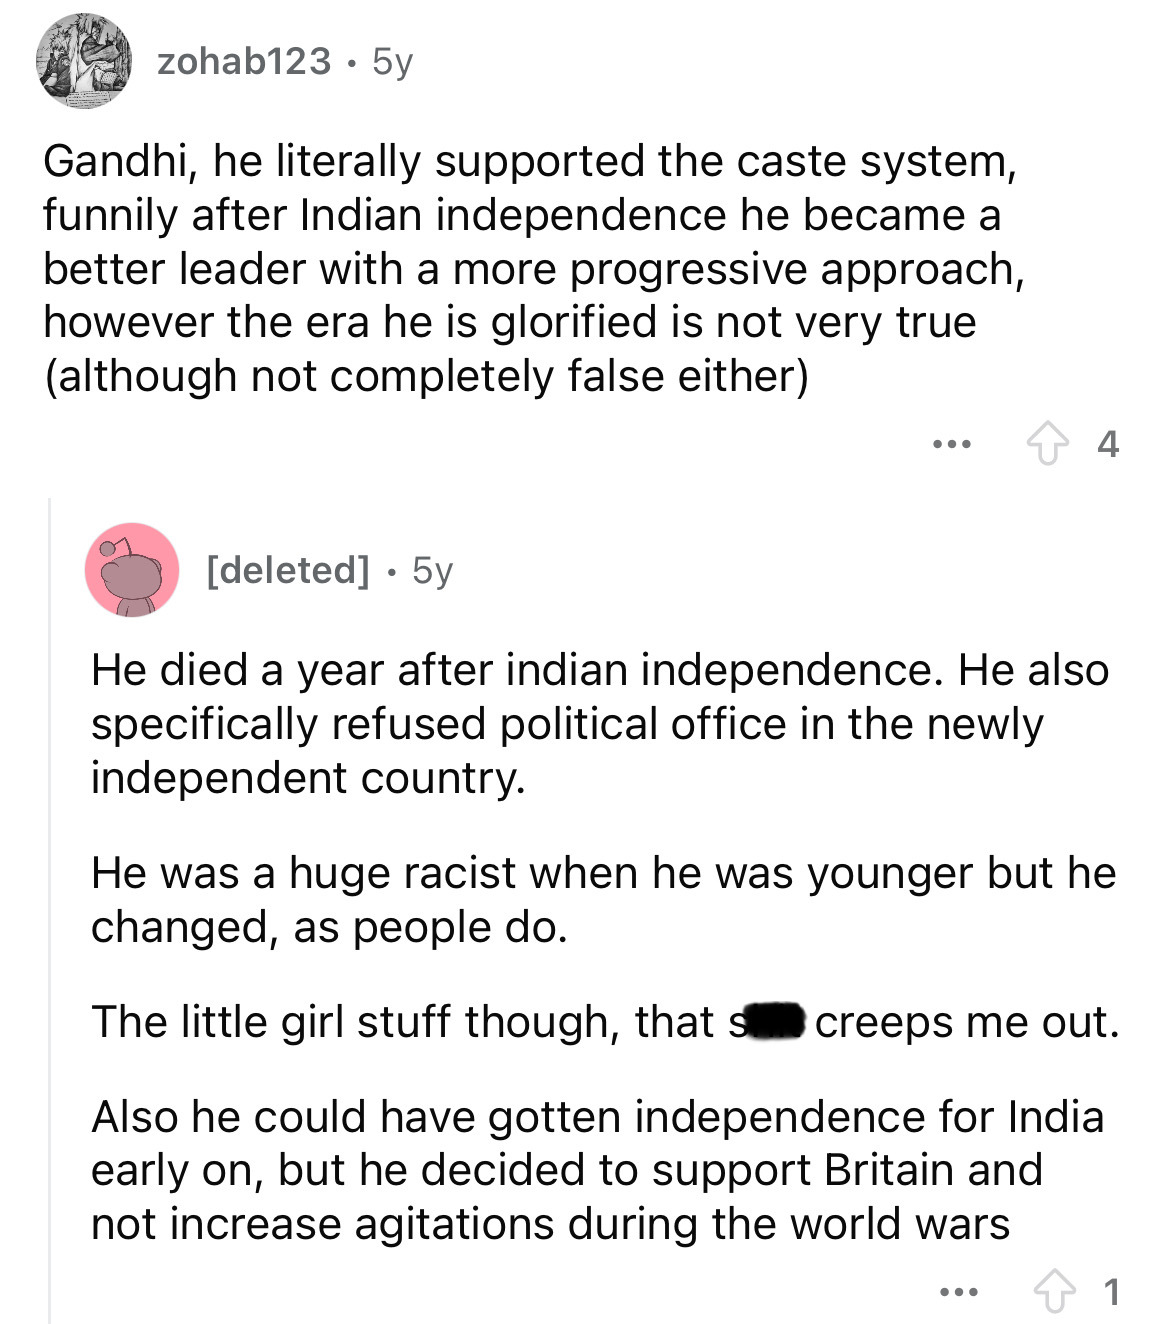 document - zohab123 5y Gandhi, he literally supported the caste system, funnily after Indian independence he became a better leader with a more progressive approach, however the era he is glorified is not very true although not completely false either ...